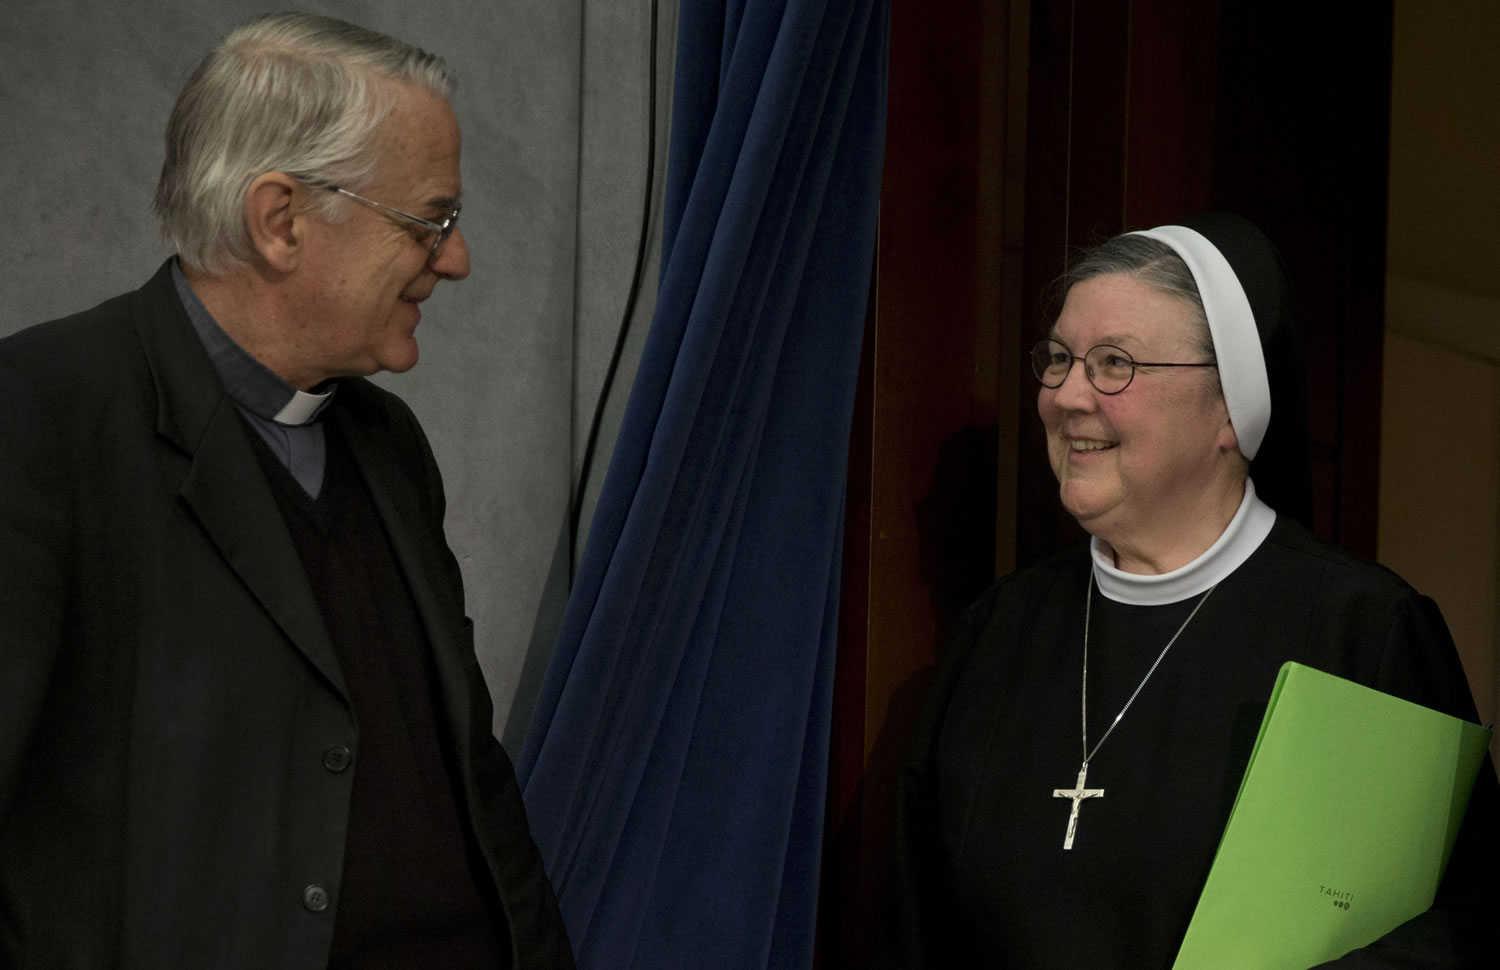 Vatican spokesperson, Father Federico Lombardi, left, greets Mother Mary Clare Millea prior to the start of a press conference at the Vatican on Tuesday.